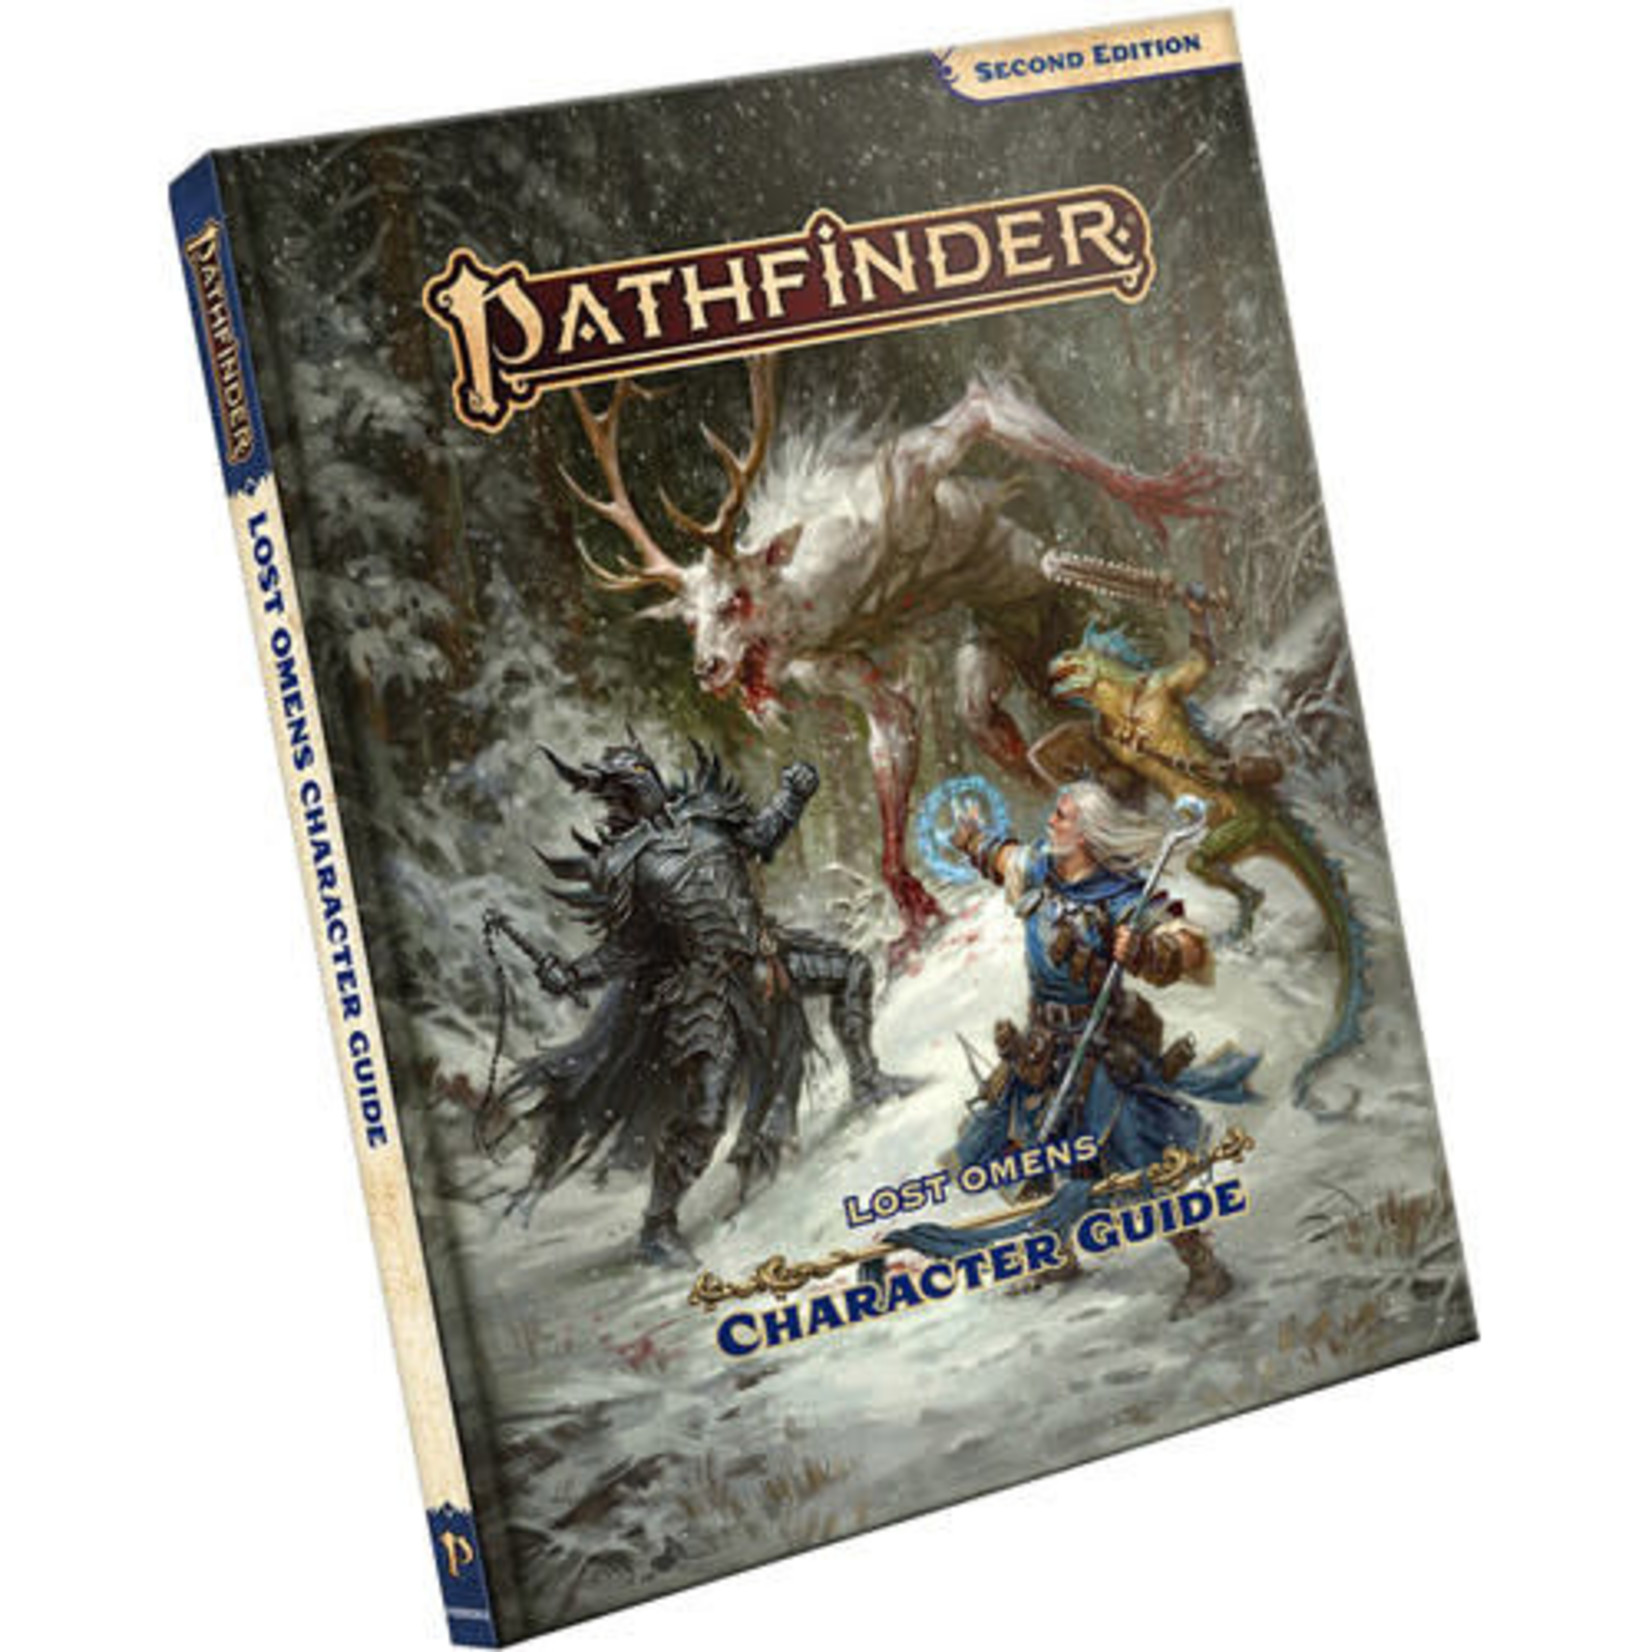 Paizo Pathfinder Second Edition: Lost Omens Character Guide Hardcover